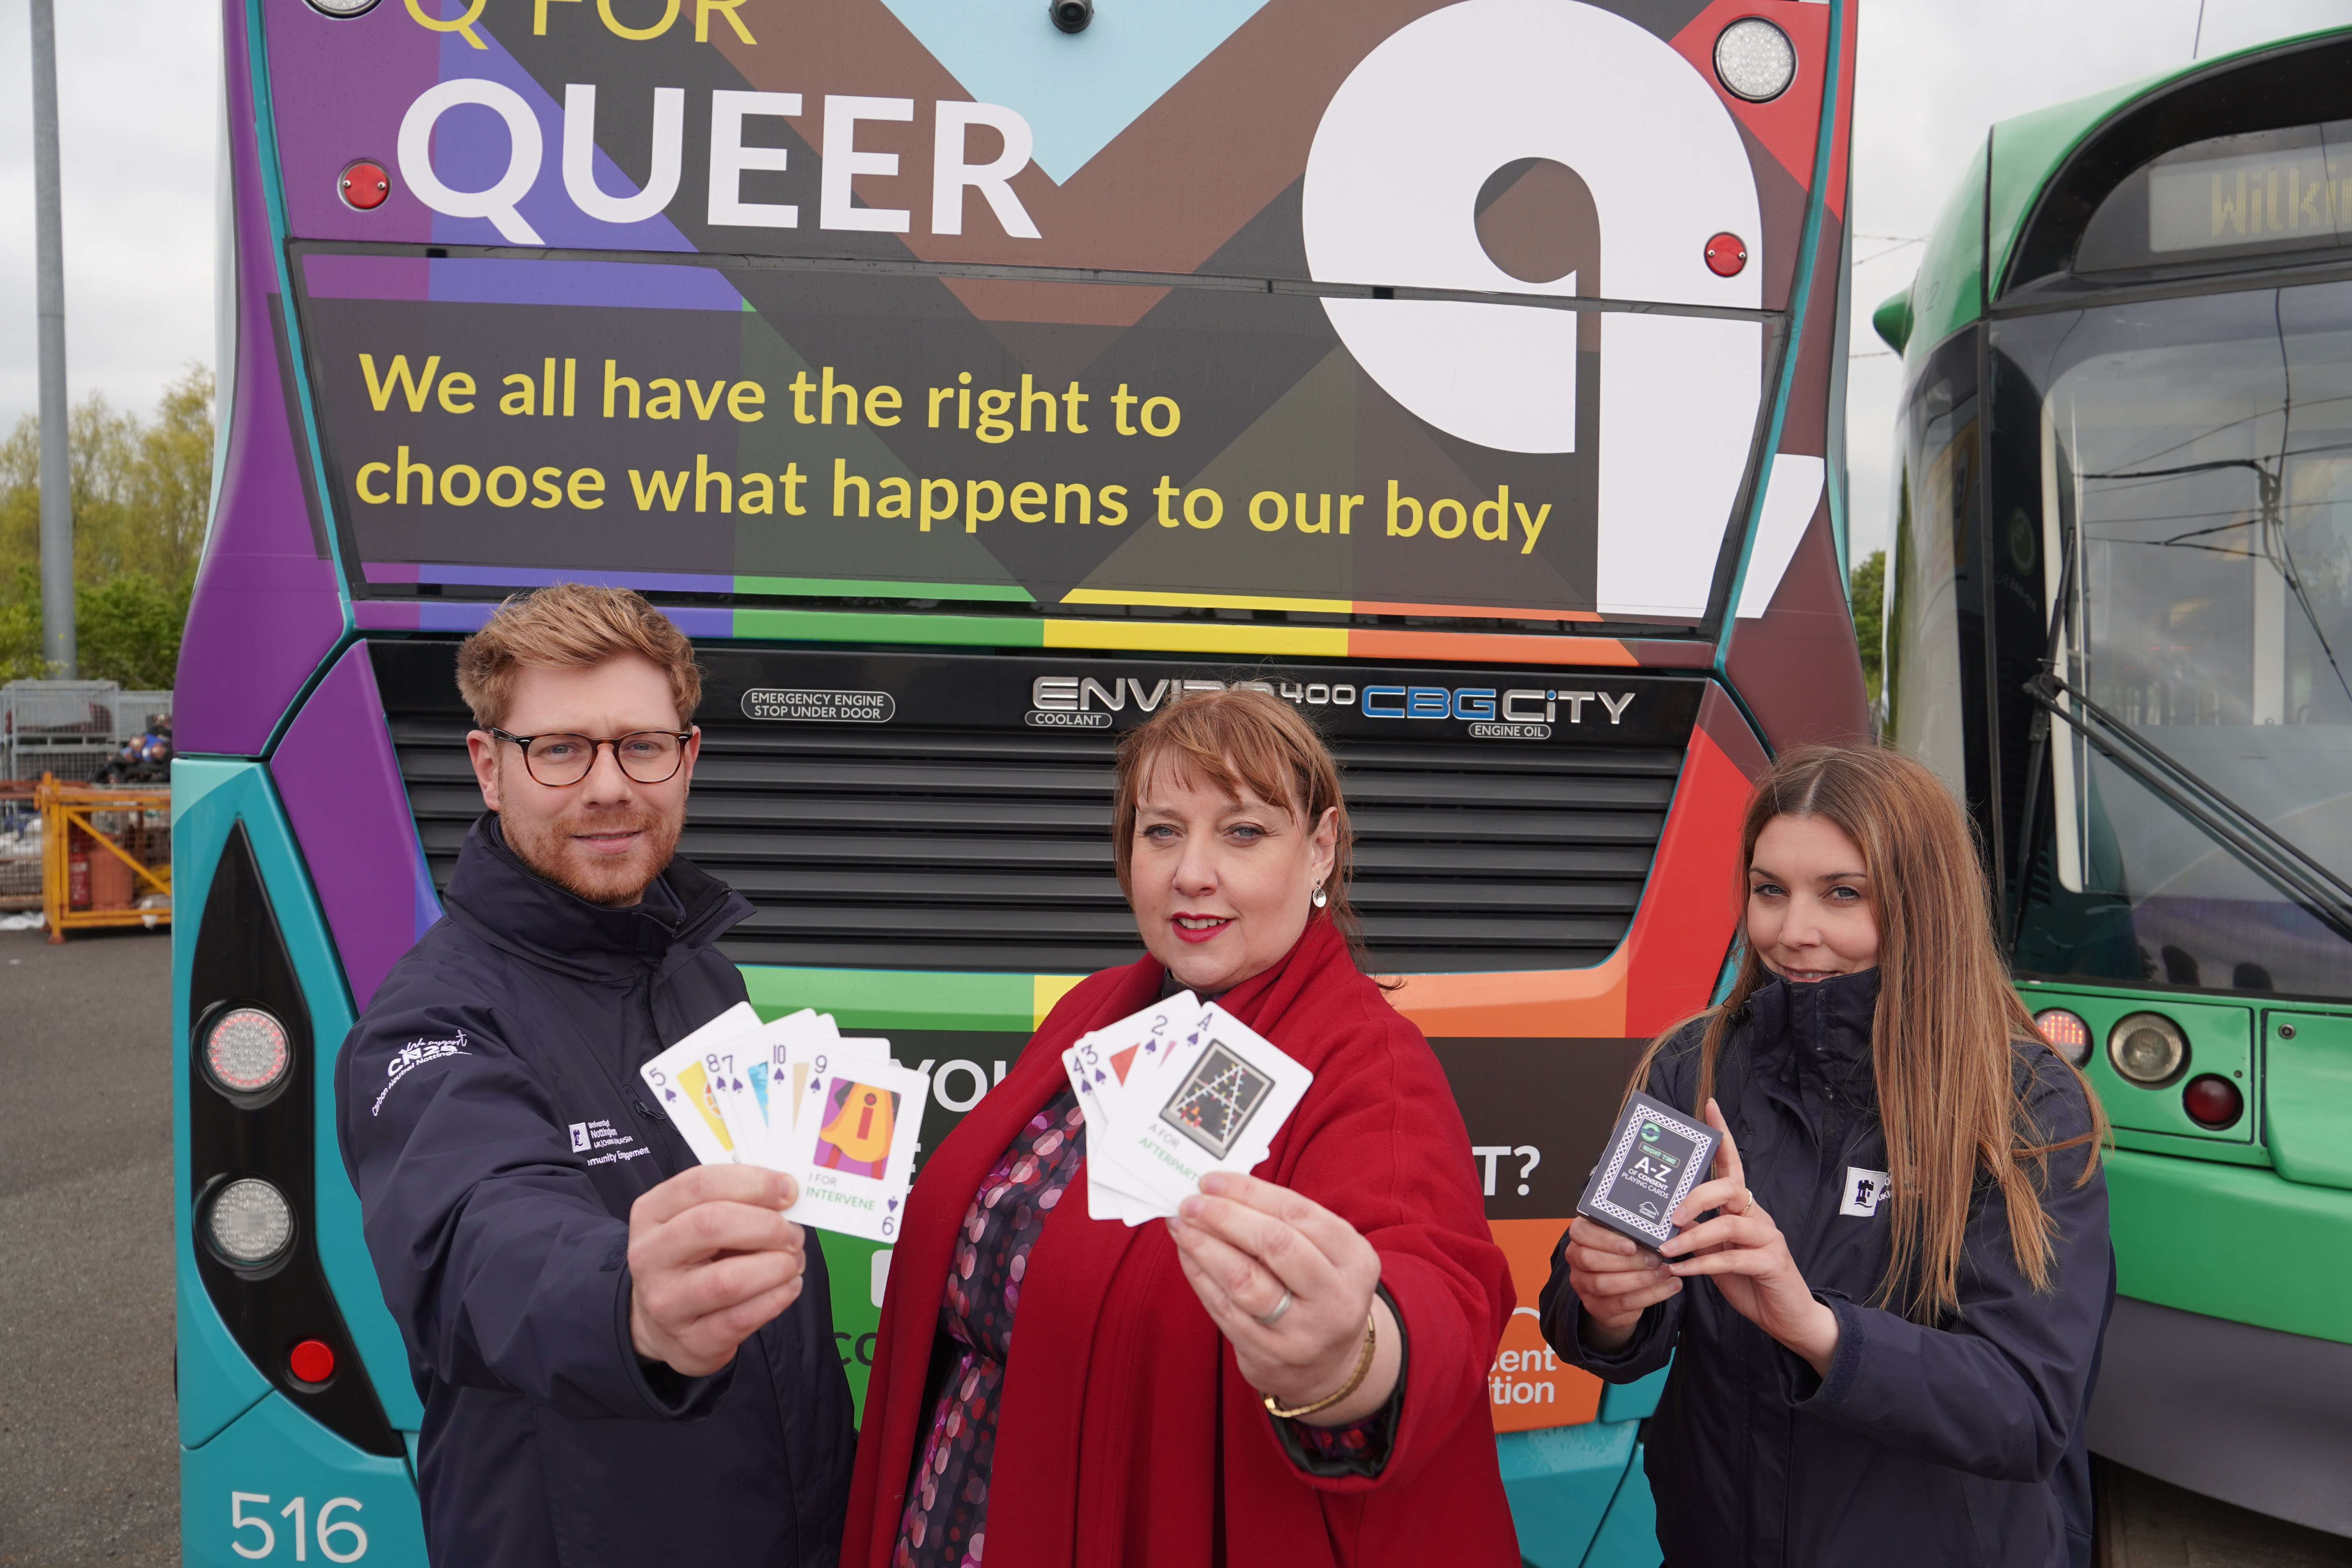 Caroline Henry (centre), behind one of the wrapped buses, said that the scheme aims to "provoke big conversations". (Office of the Nottinghamshire Police and Crime Commissioner/PA)